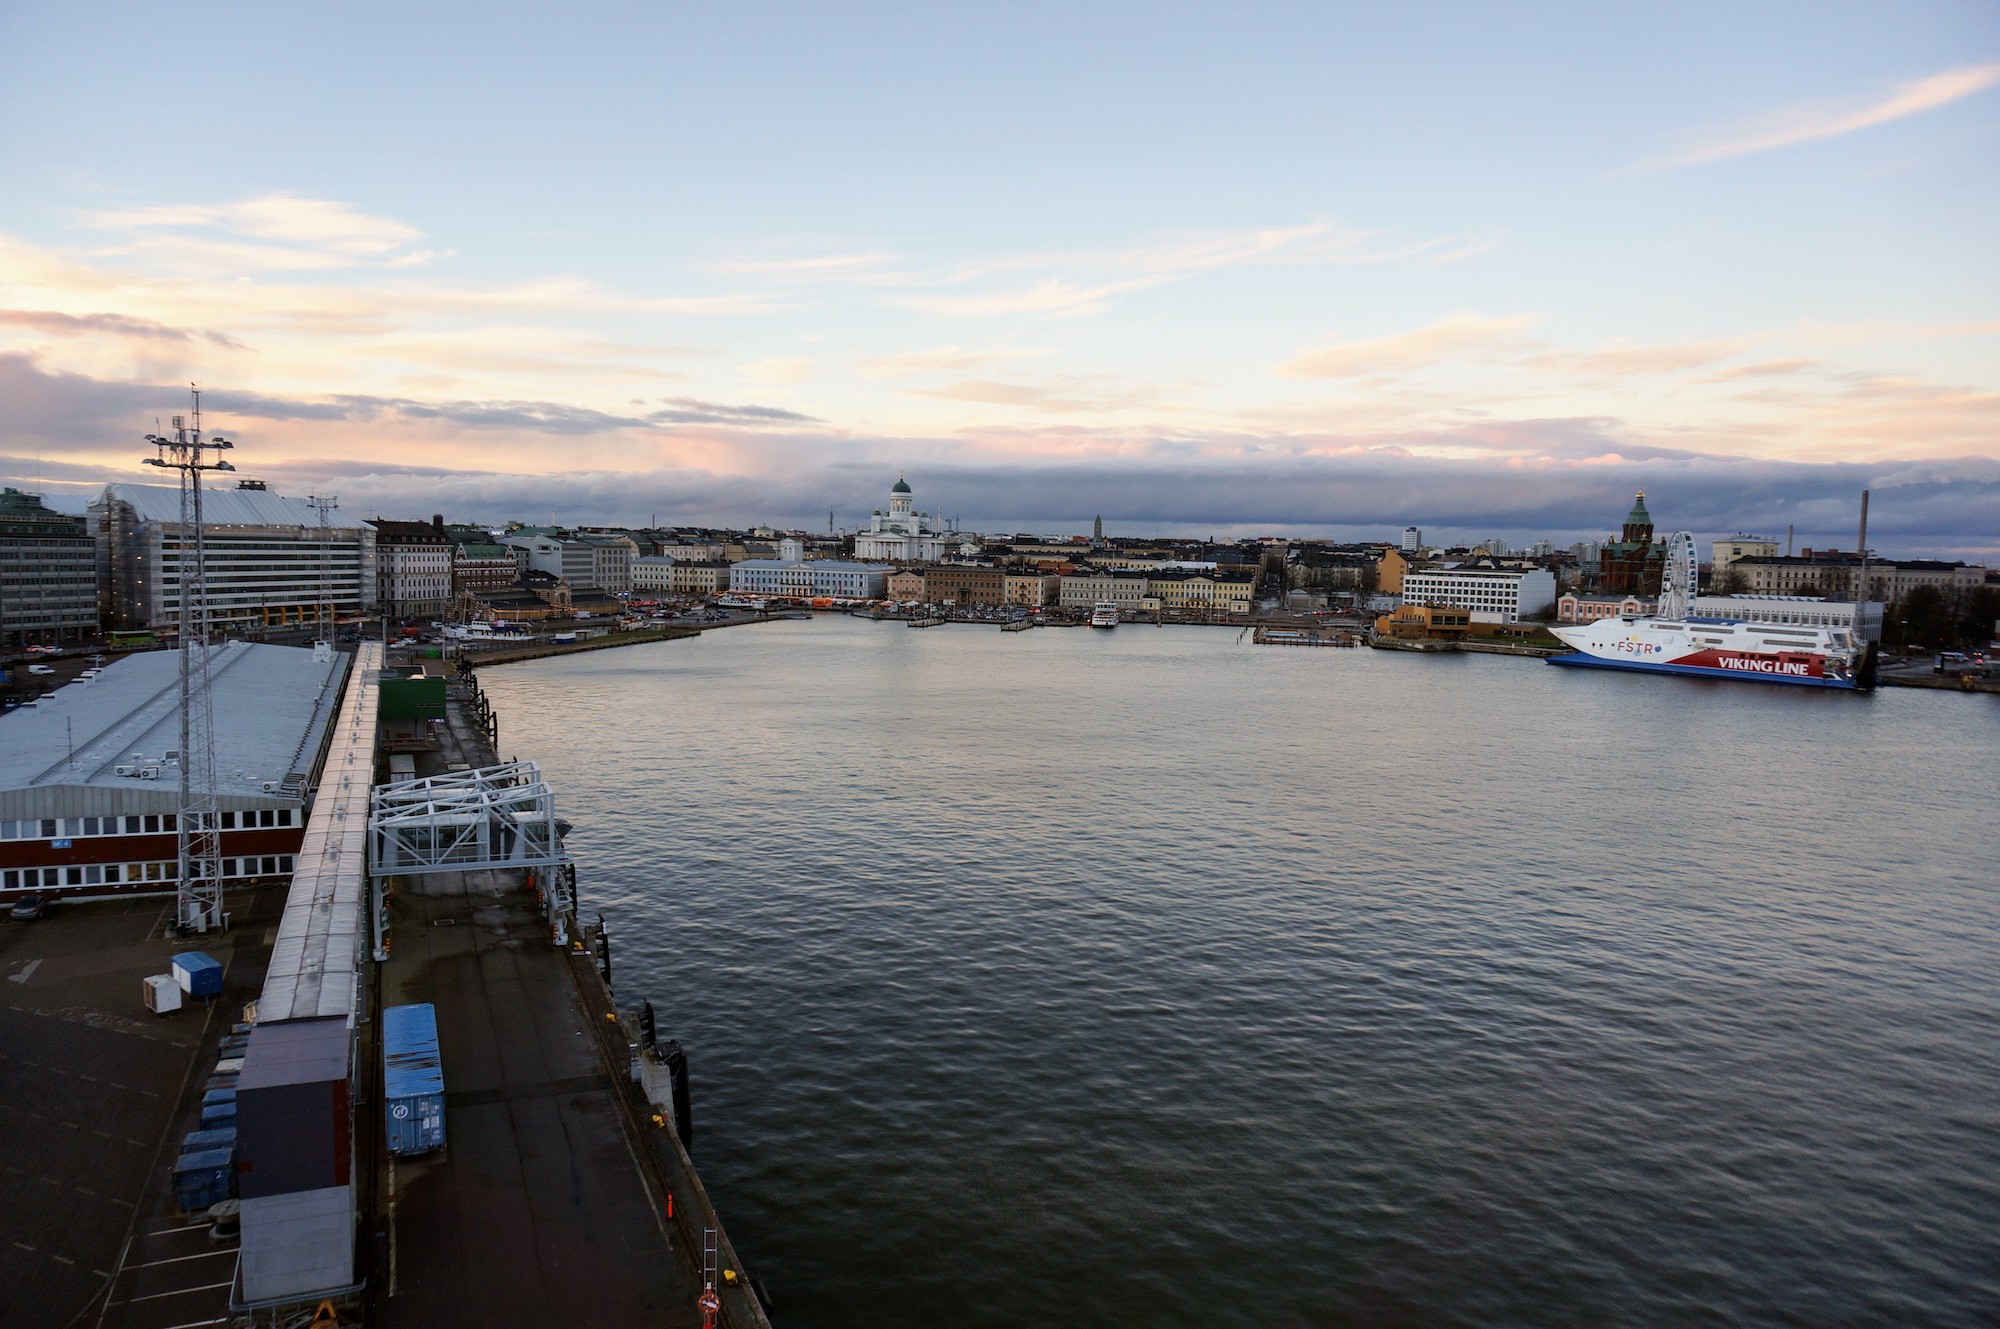 Aboard a ferry docked at Olypmia Terminal, towards the left is Makasiini terminal, and to the right, a Viking Line ship docked at Katajanokka.